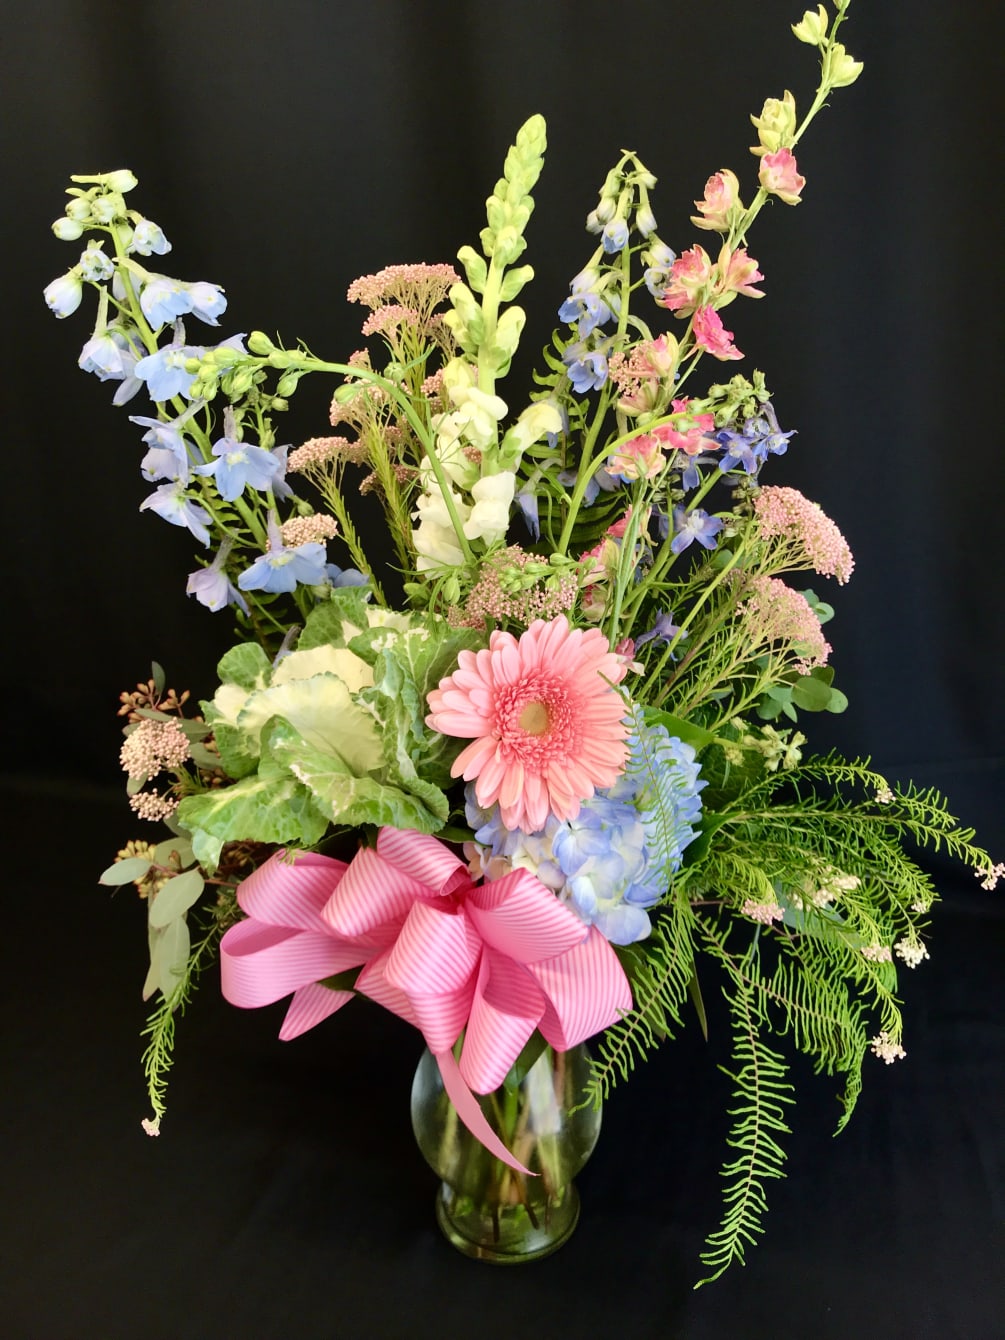 Springtime and perfect for Easter this pastel beauty is tall and festive.